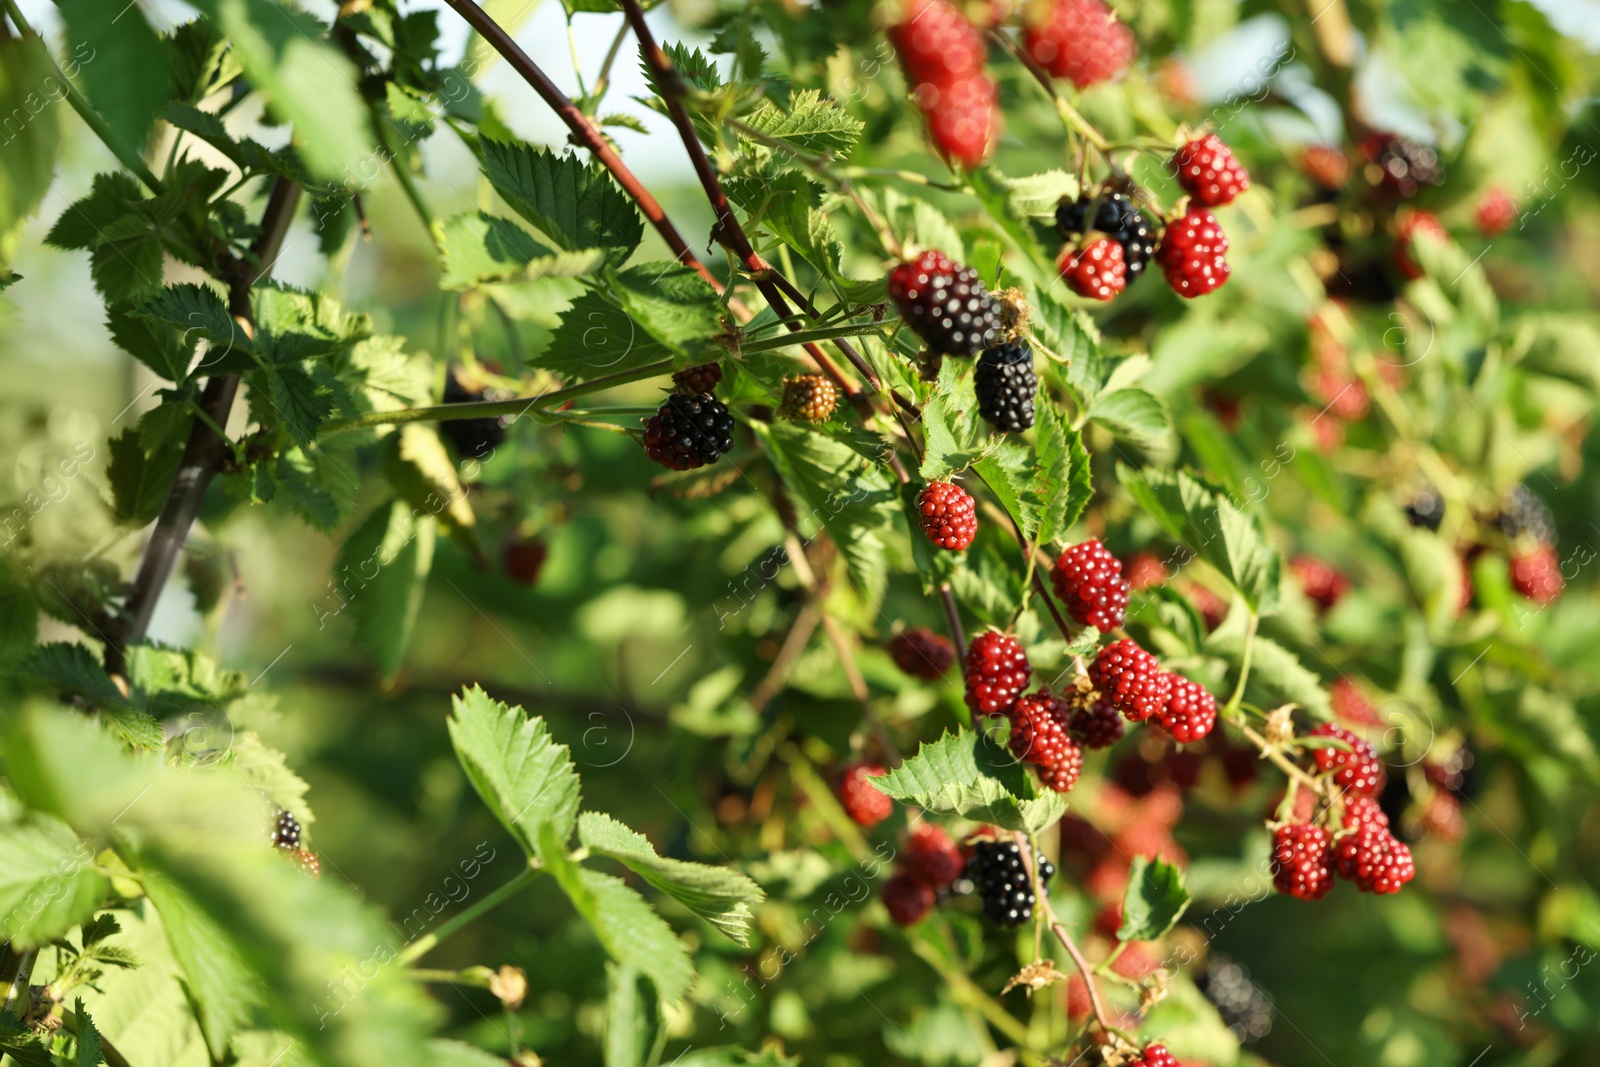 Photo of Ripe and unripe blackberries growing on bush outdoors, closeup